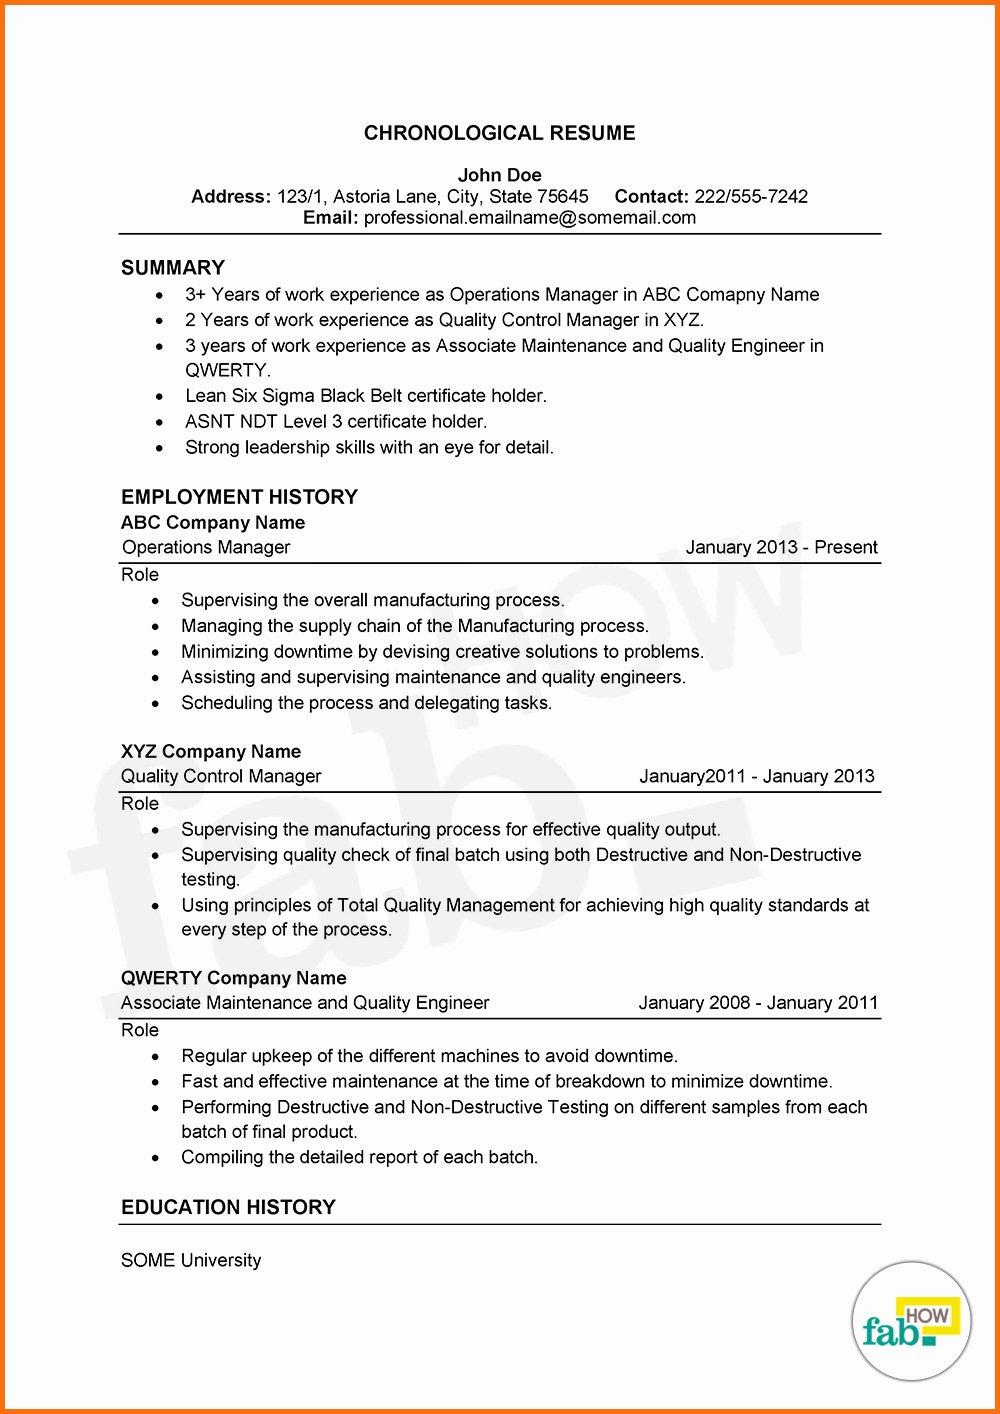 What is Reverse Chronological order Resume